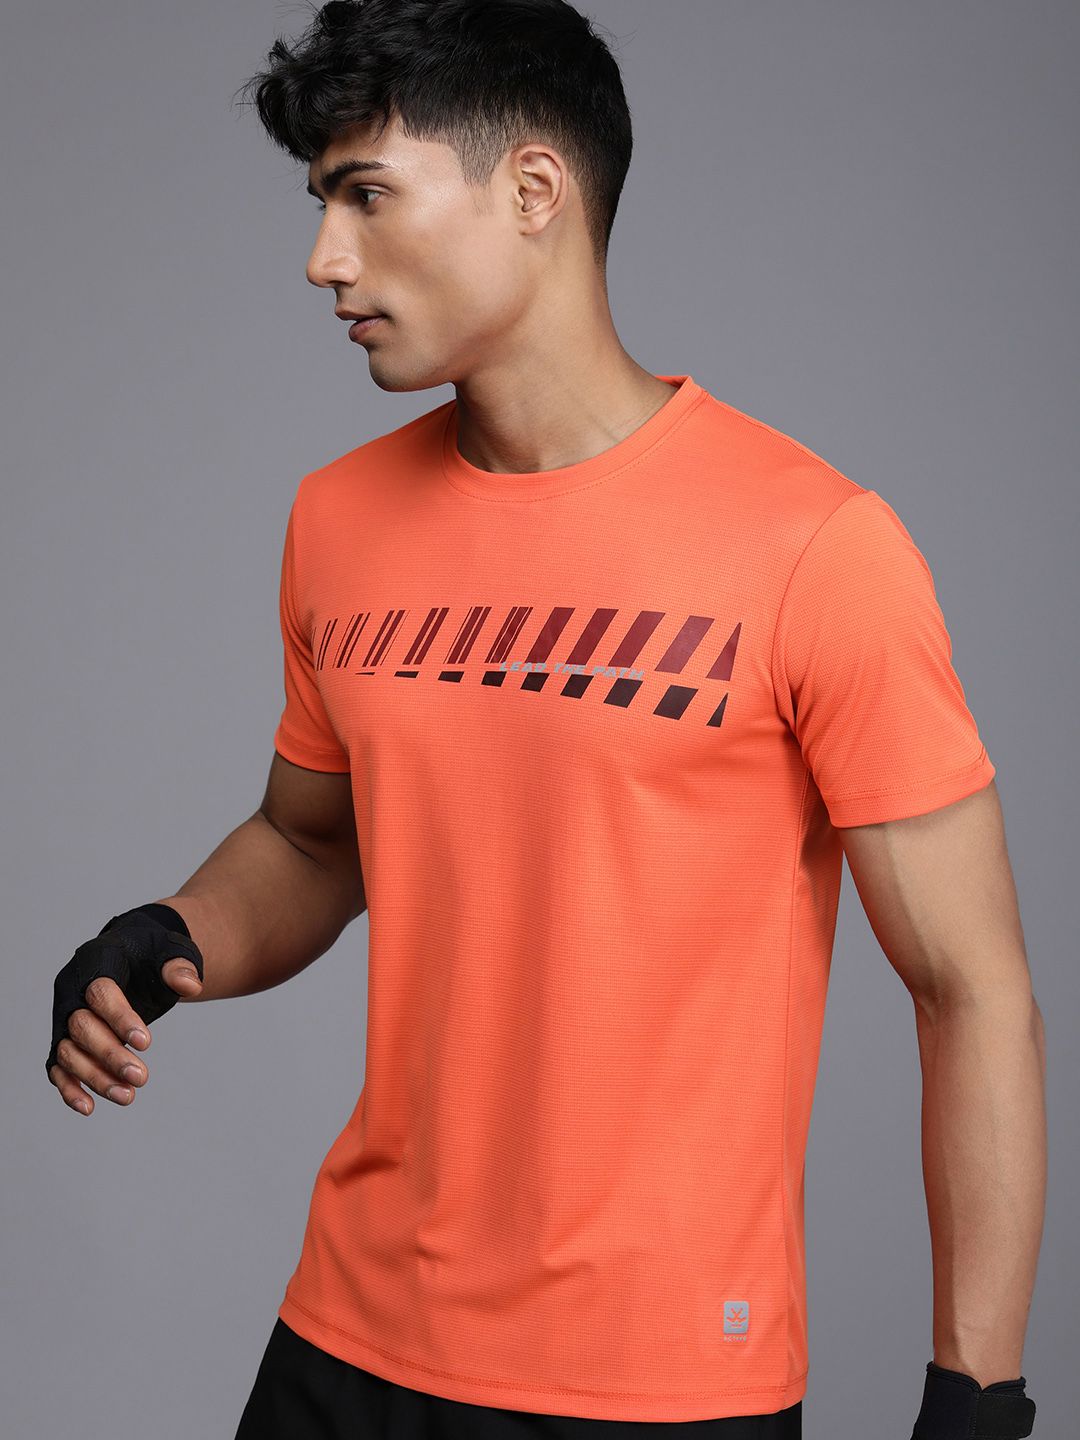 WROGN ACTIVE Striped Dry Pro Slim Fit Sports T-shirt - Price History